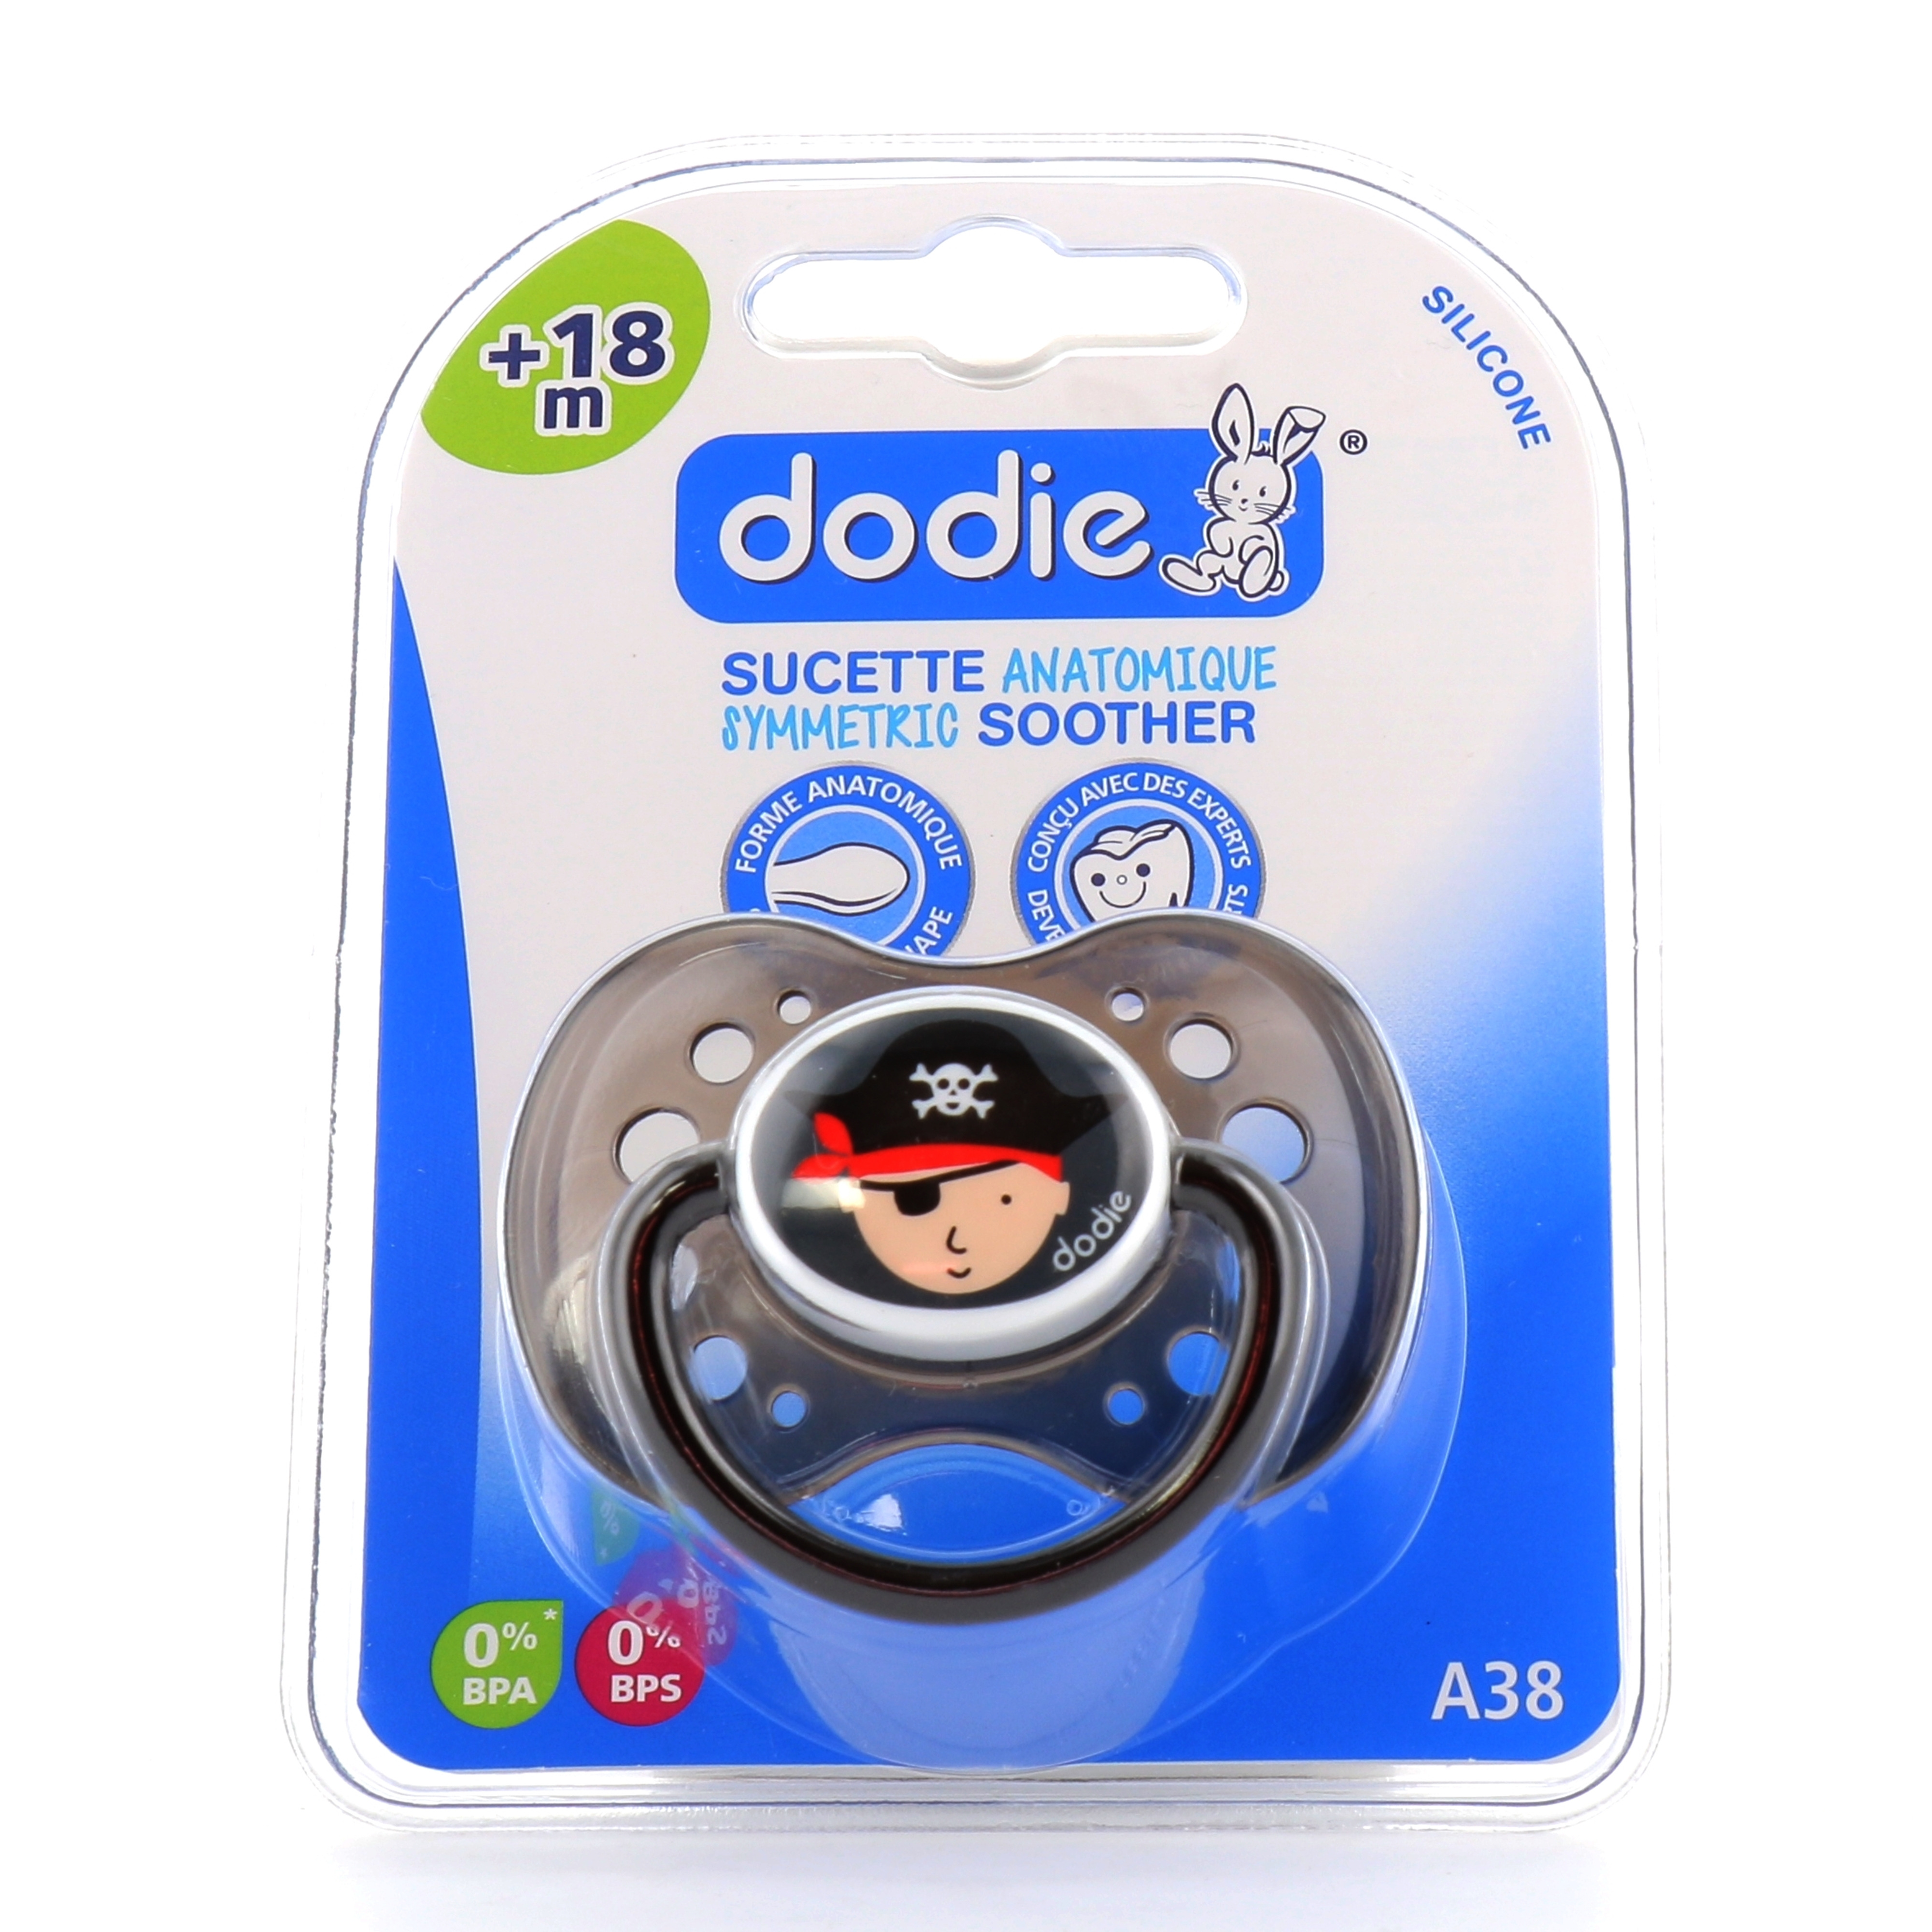 Dodie 2 Sucettes Anatomiques Silicone +18mois famille moins cher